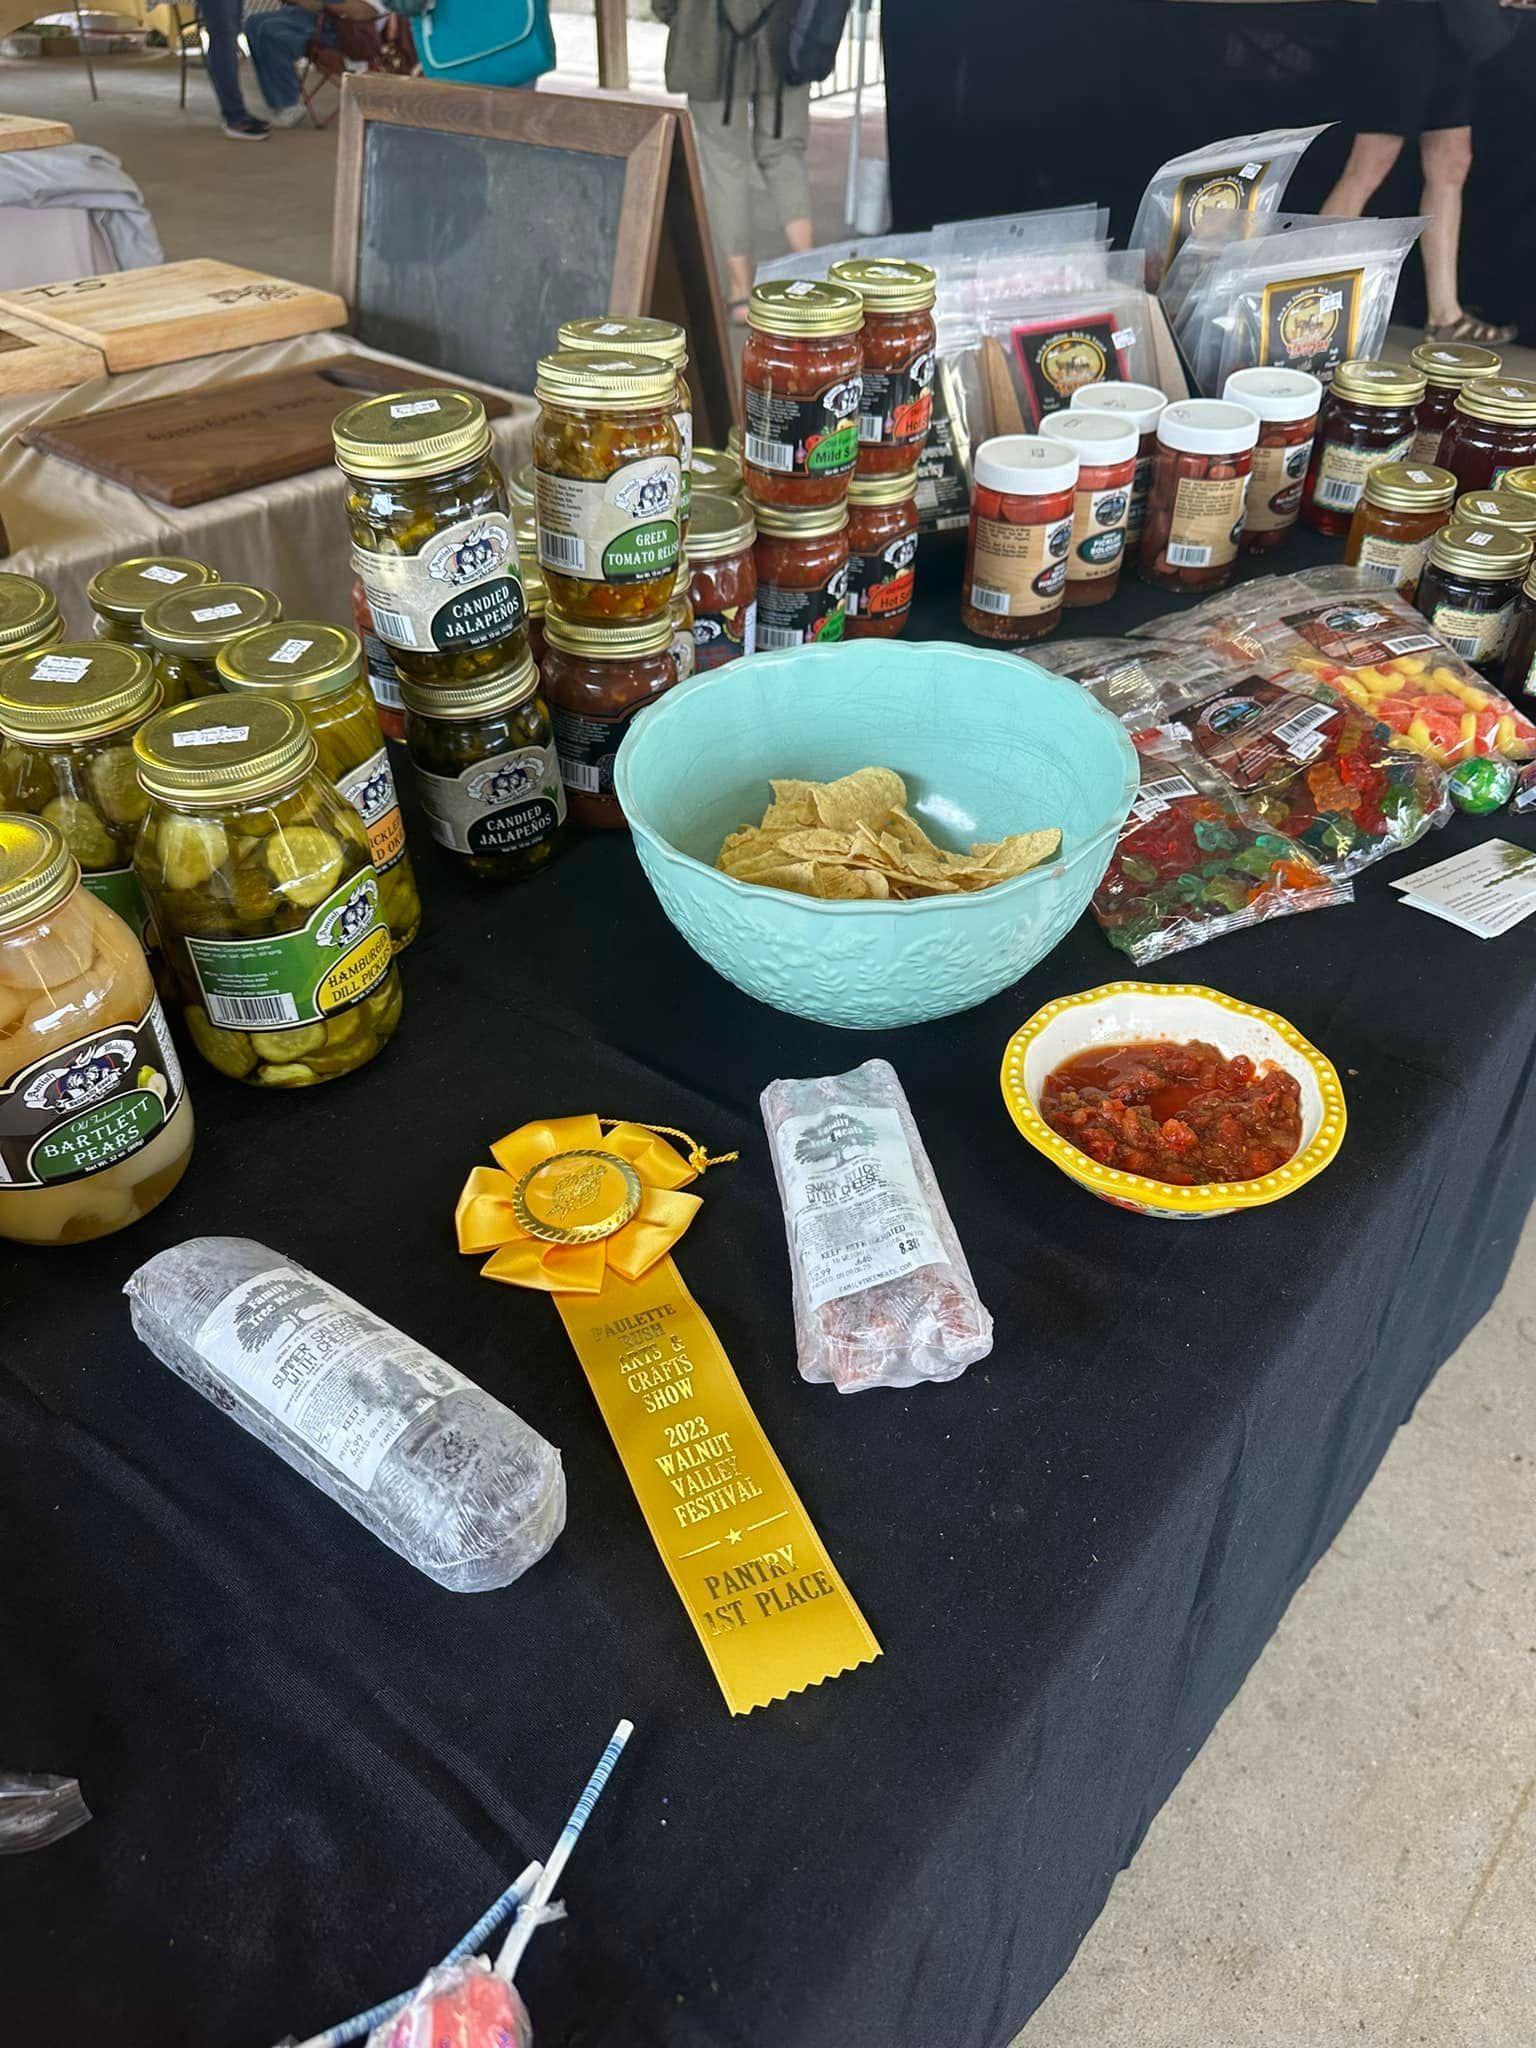 1st place award on table with cans and jars of specialty foods